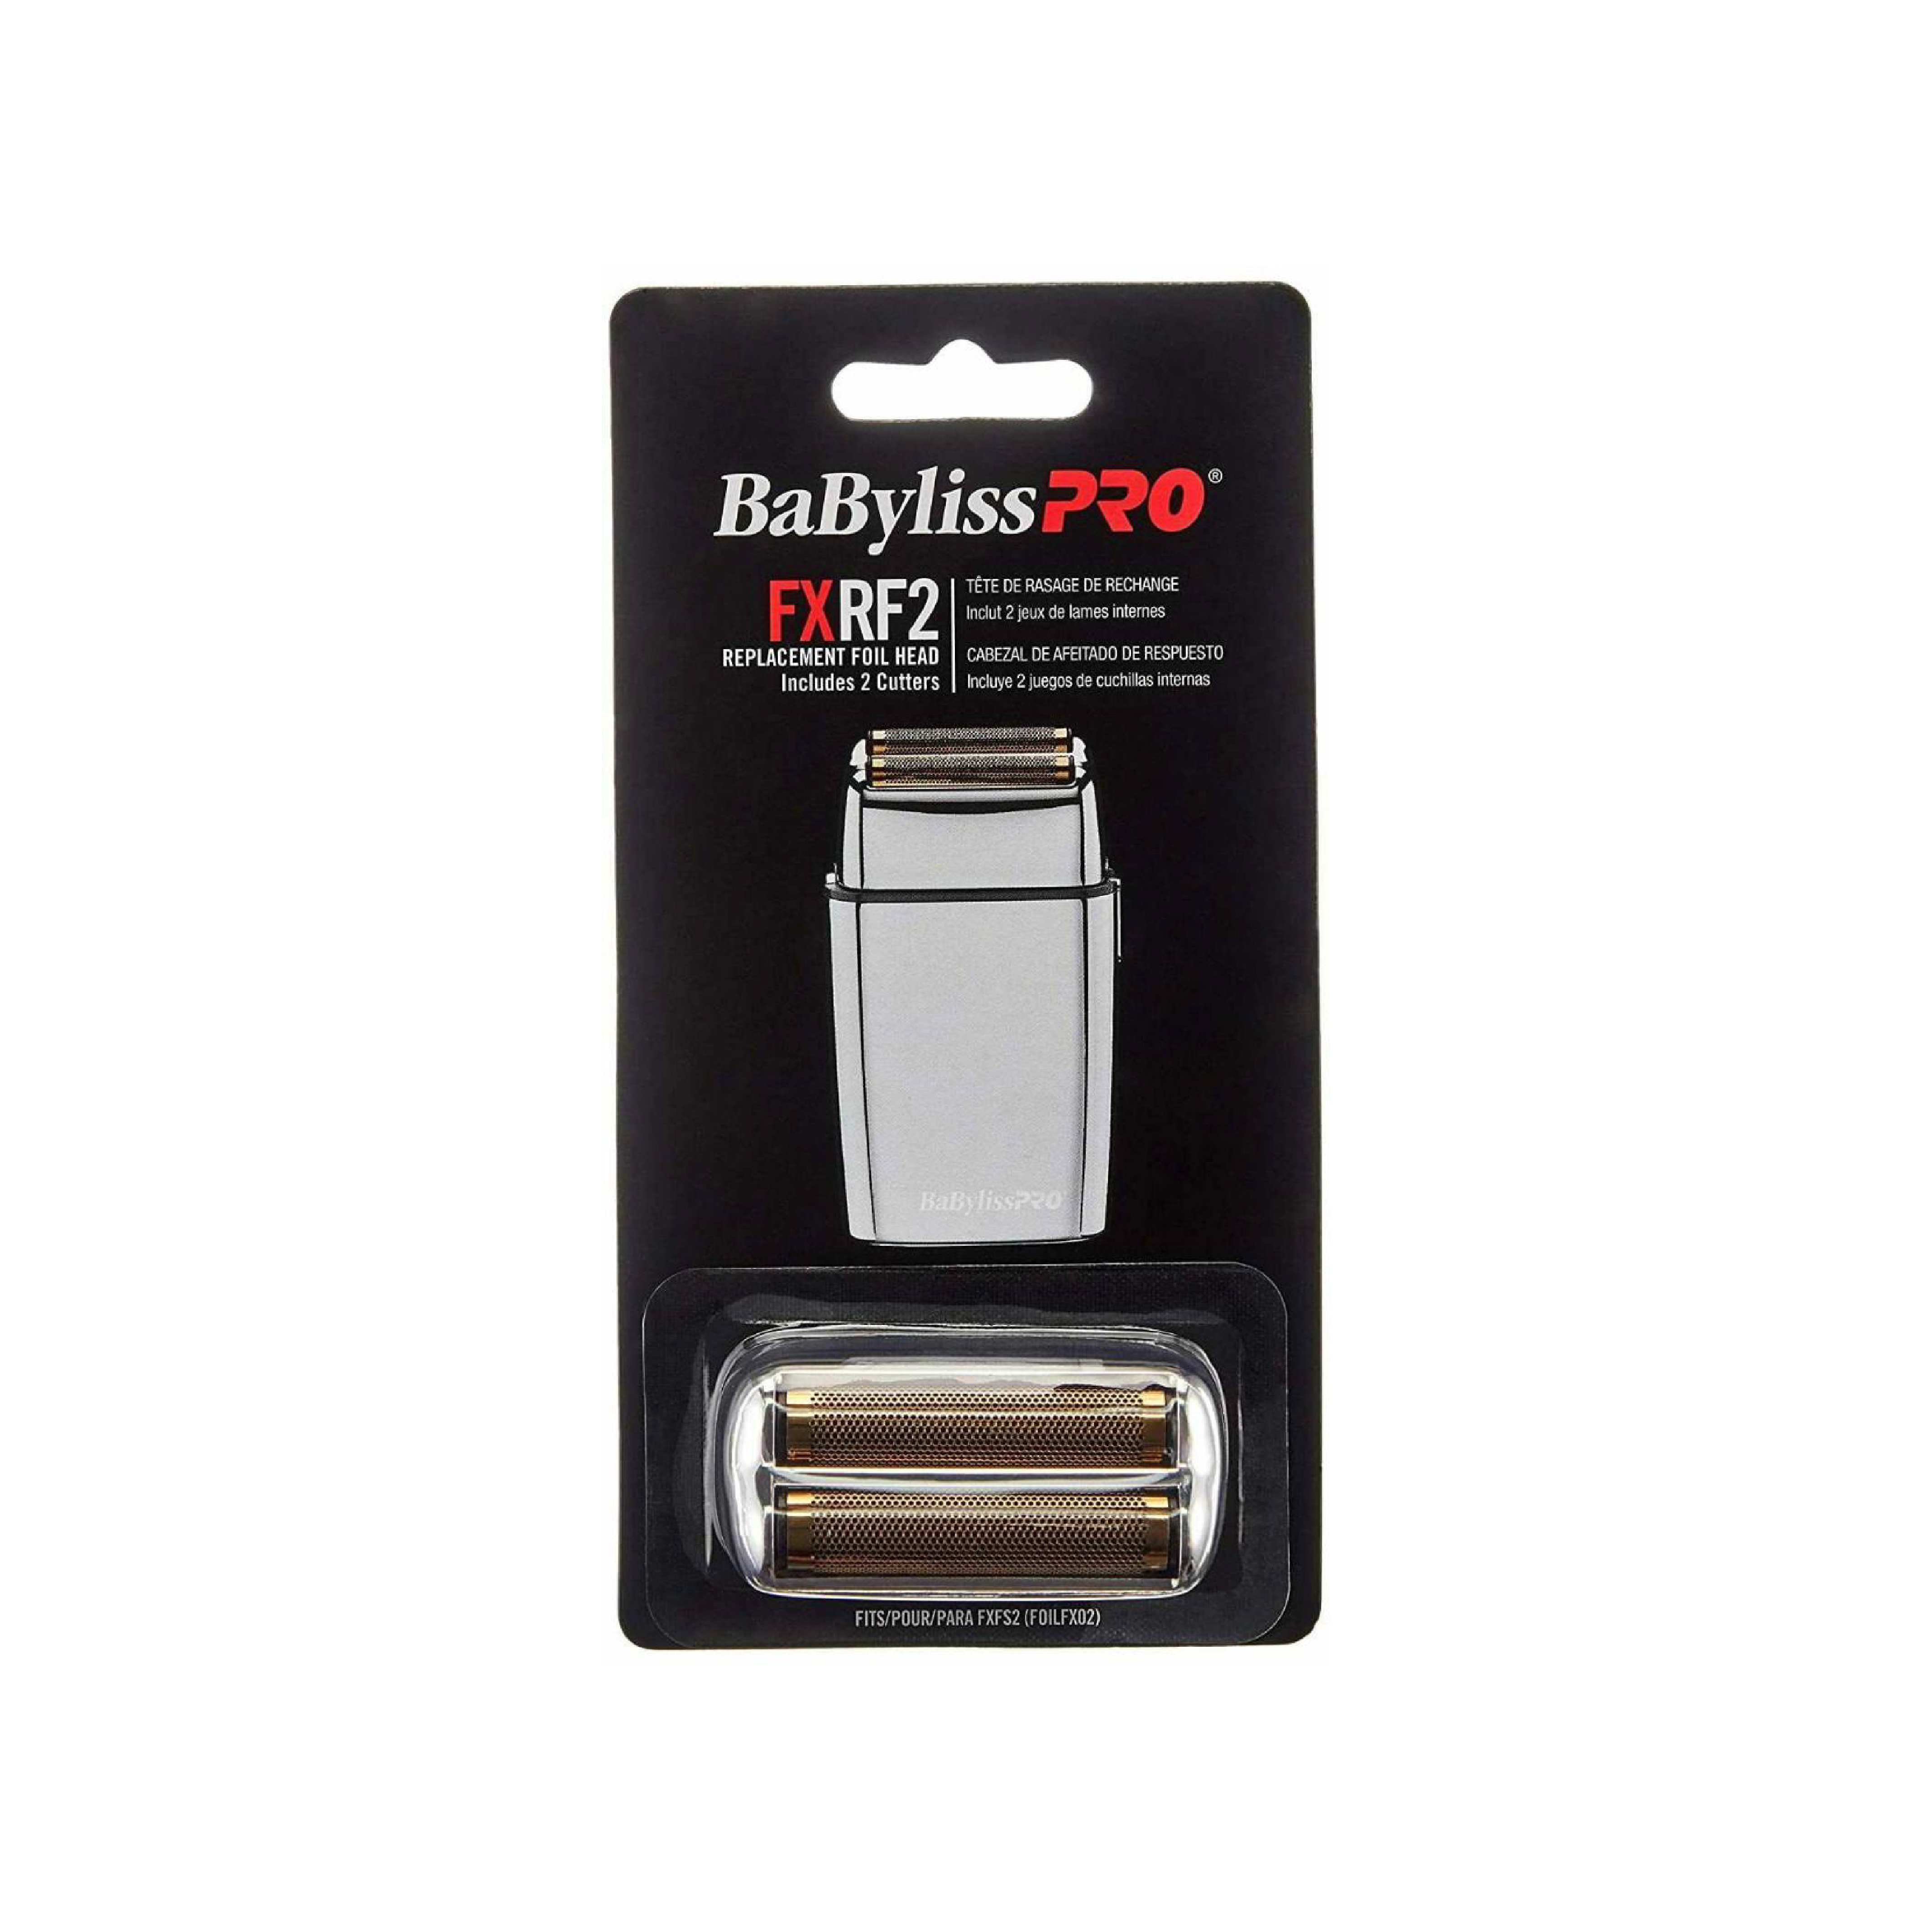 Babyliss PRO FoilFX02 Shaver Silver Replacement Foil And Cutter - FXRF2